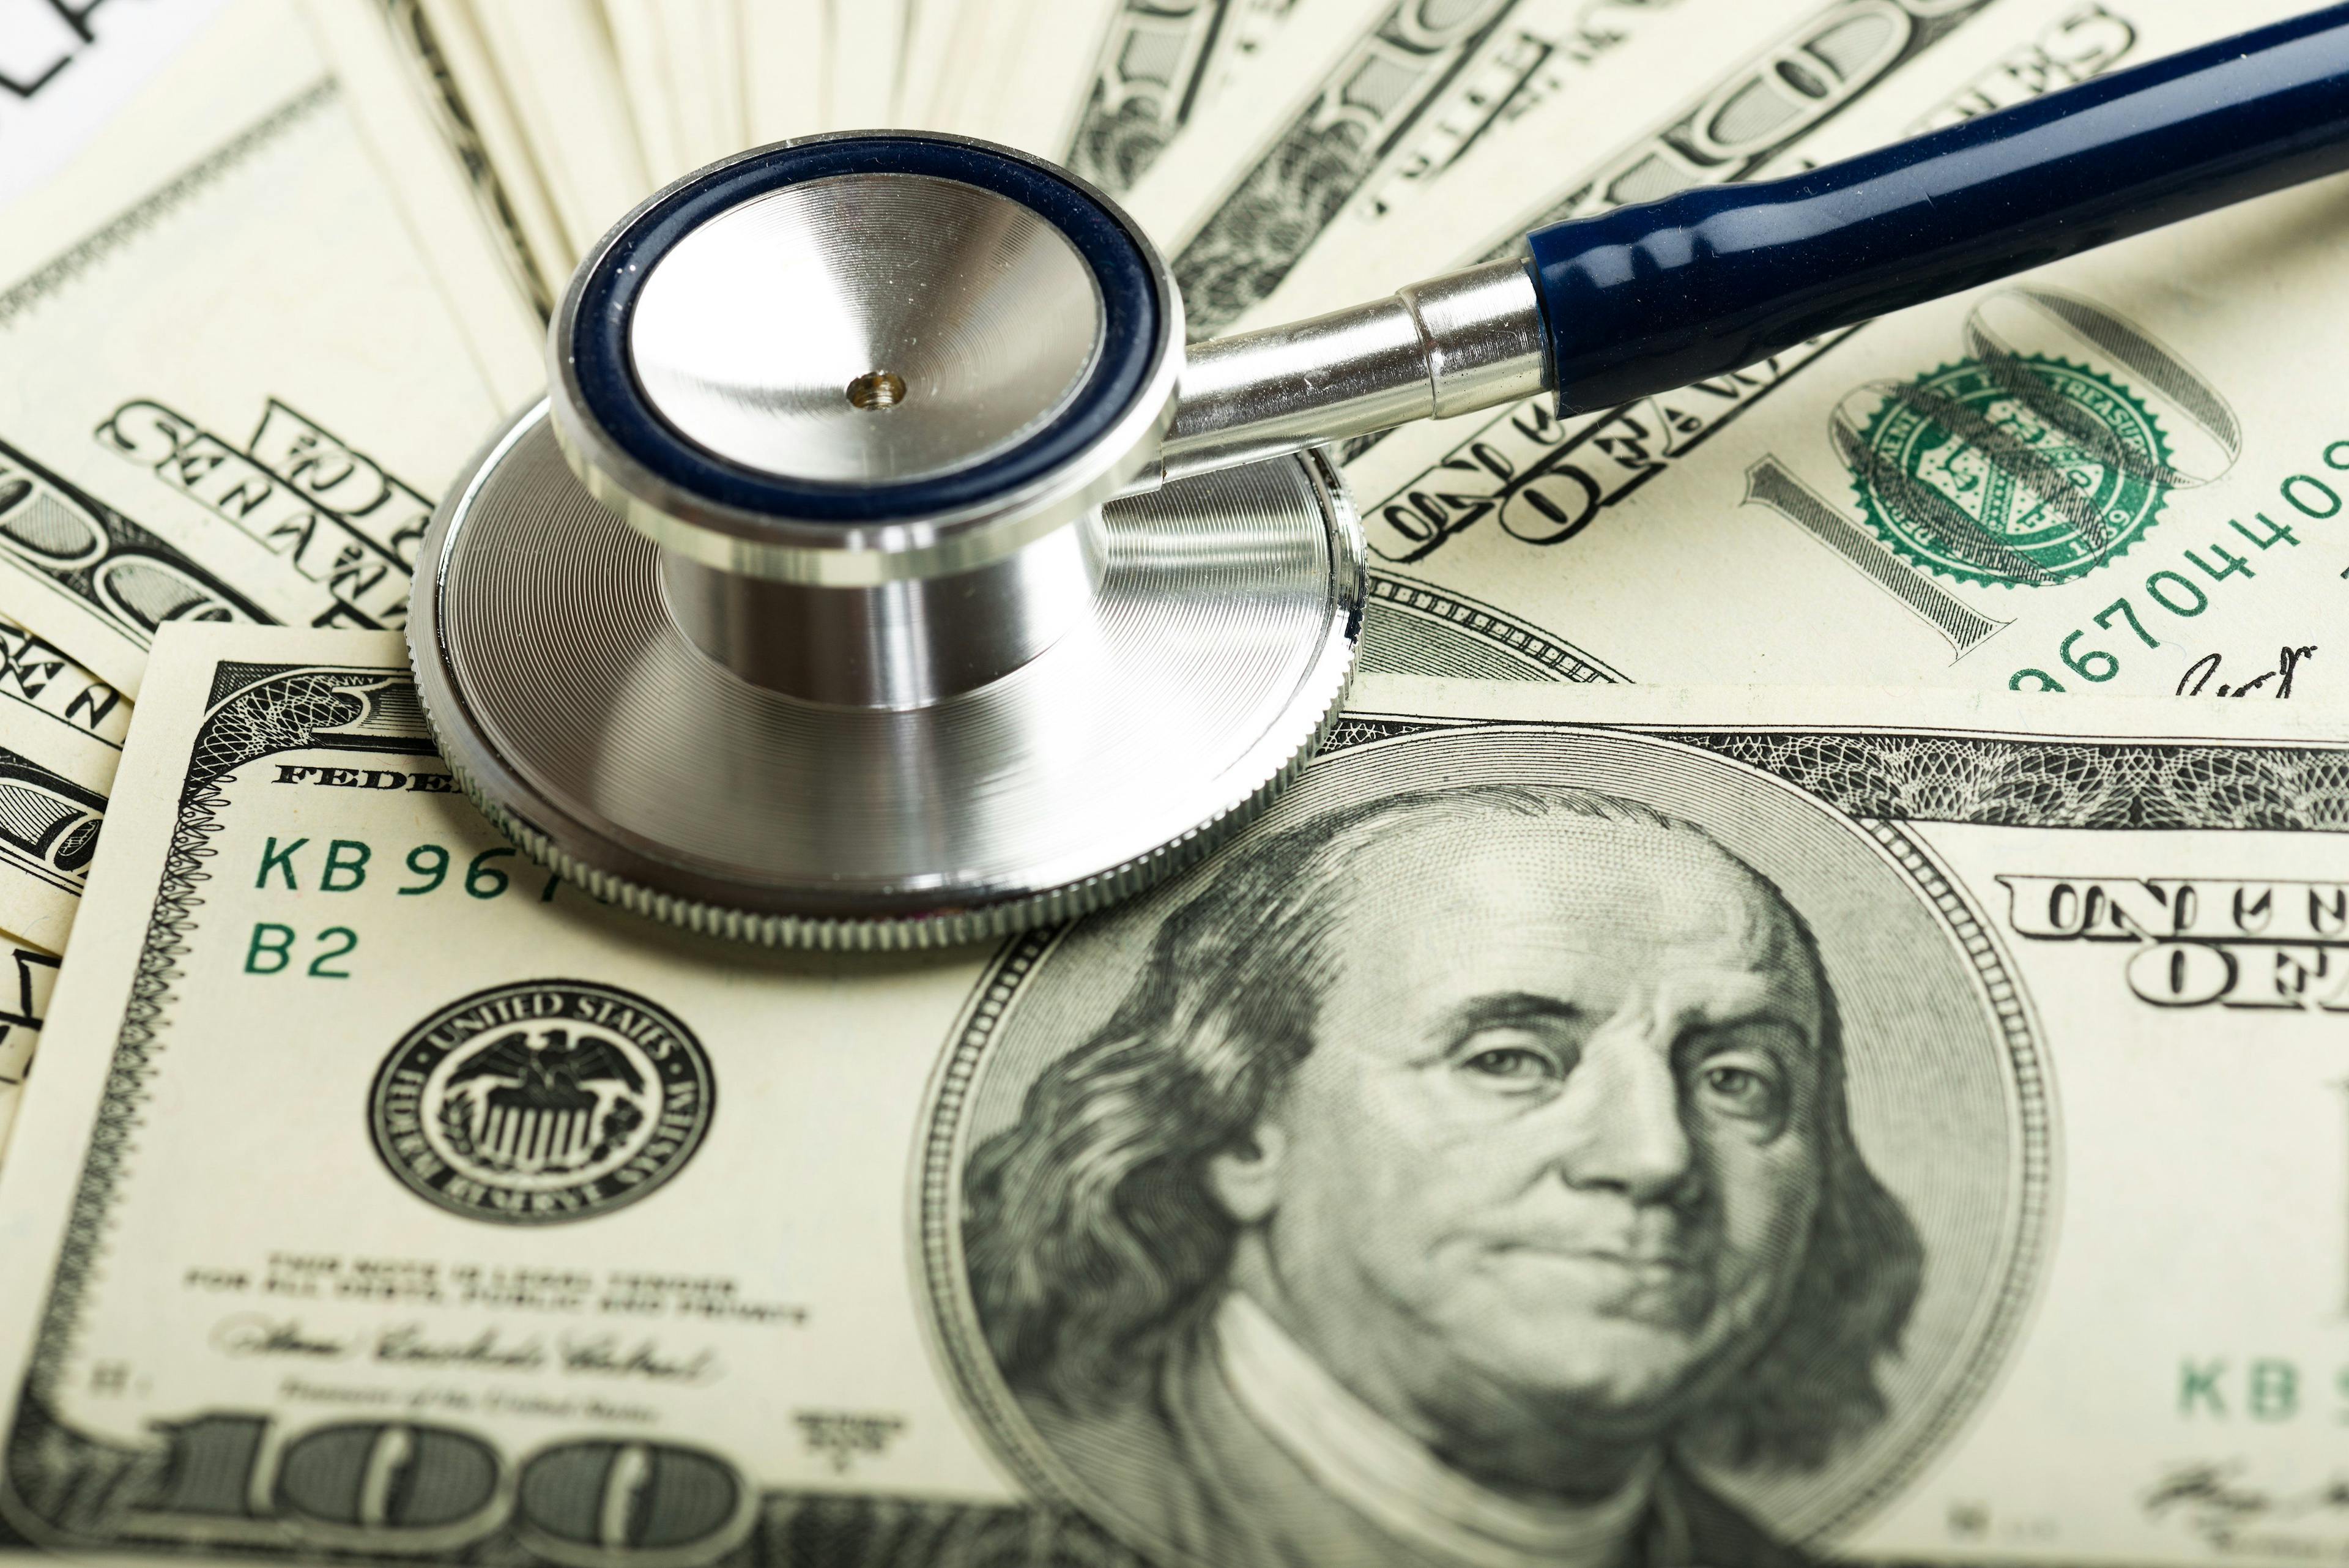 Private equity acquisition of medical practices increased in recent years